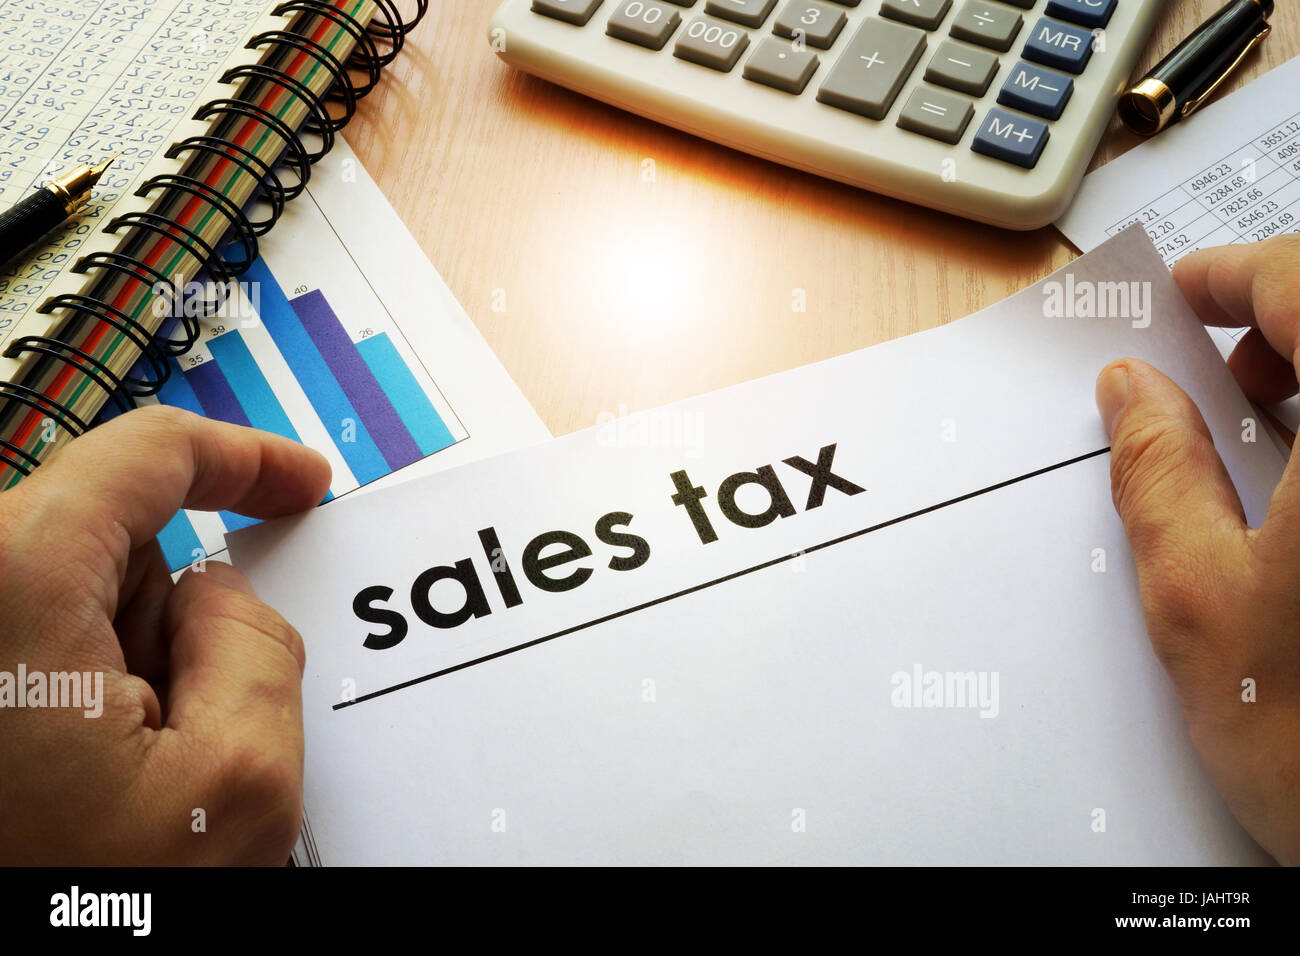 Hands holding documents with title sales tax. Stock Photo